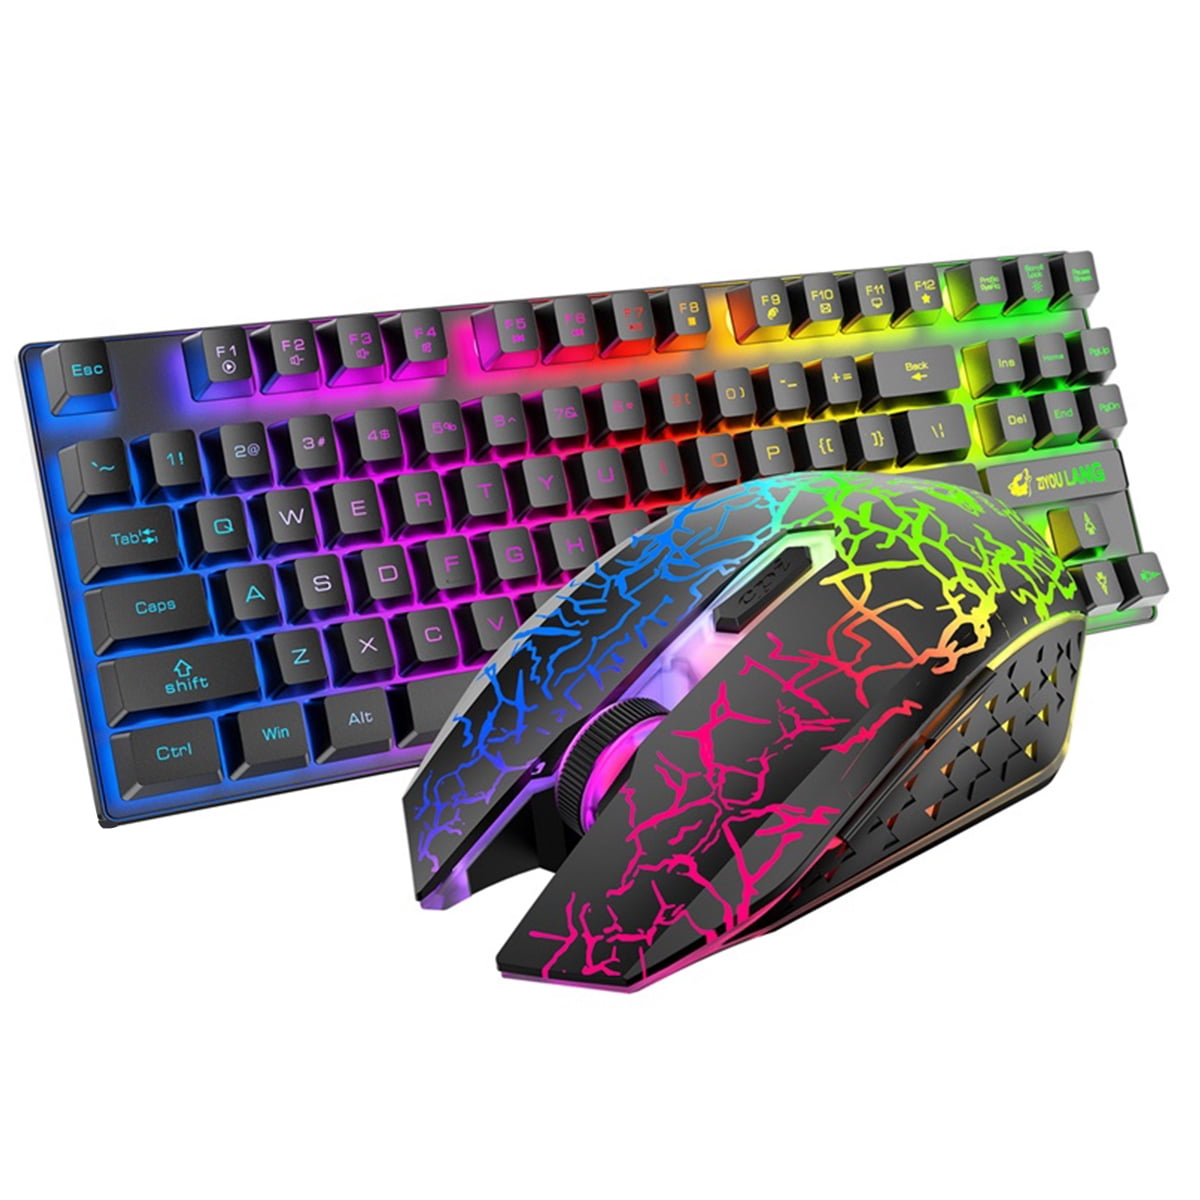 Wireless Keyboard and Mouse with Mouse Pad, 87Keys Mechanical Feeling RGB Backlit Waterproof Keyboard,3 Gear Adjustable DPI Mouse for Computer for Mac PC - Walmart.com